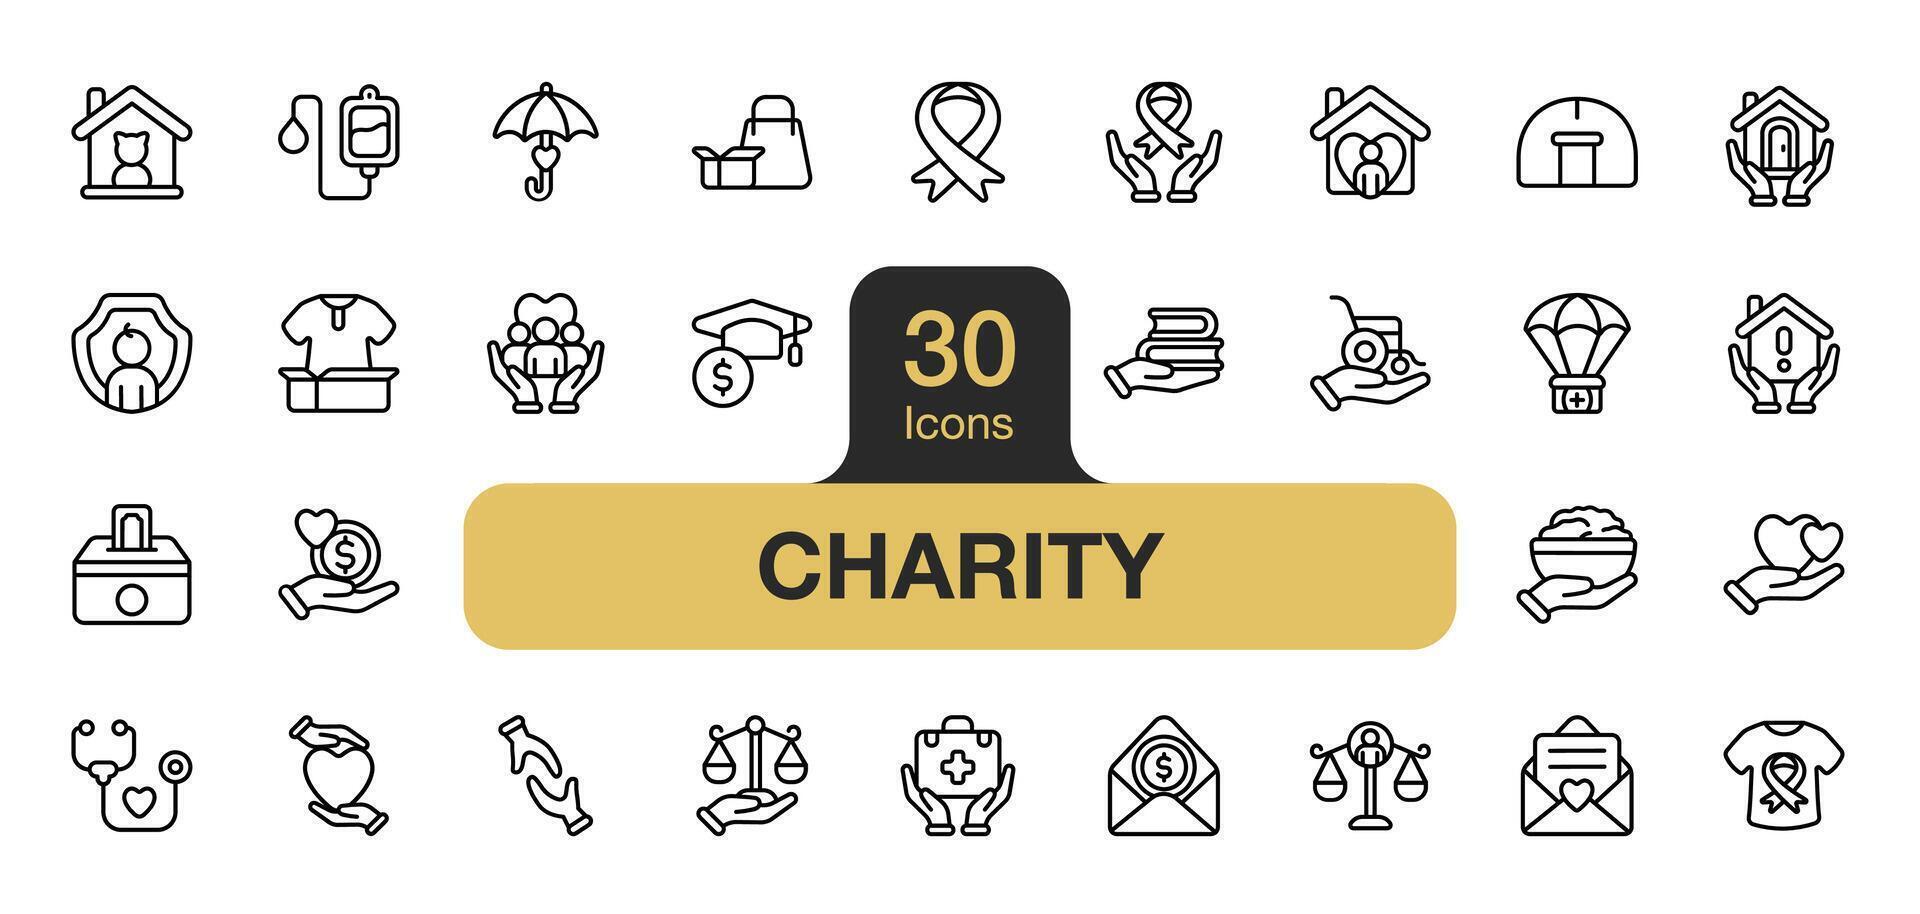 Set of 30 Charity icon element sets. Includes Volunteer, Donation, Sheltering, Charity support, and More. Outline icons vector collection.